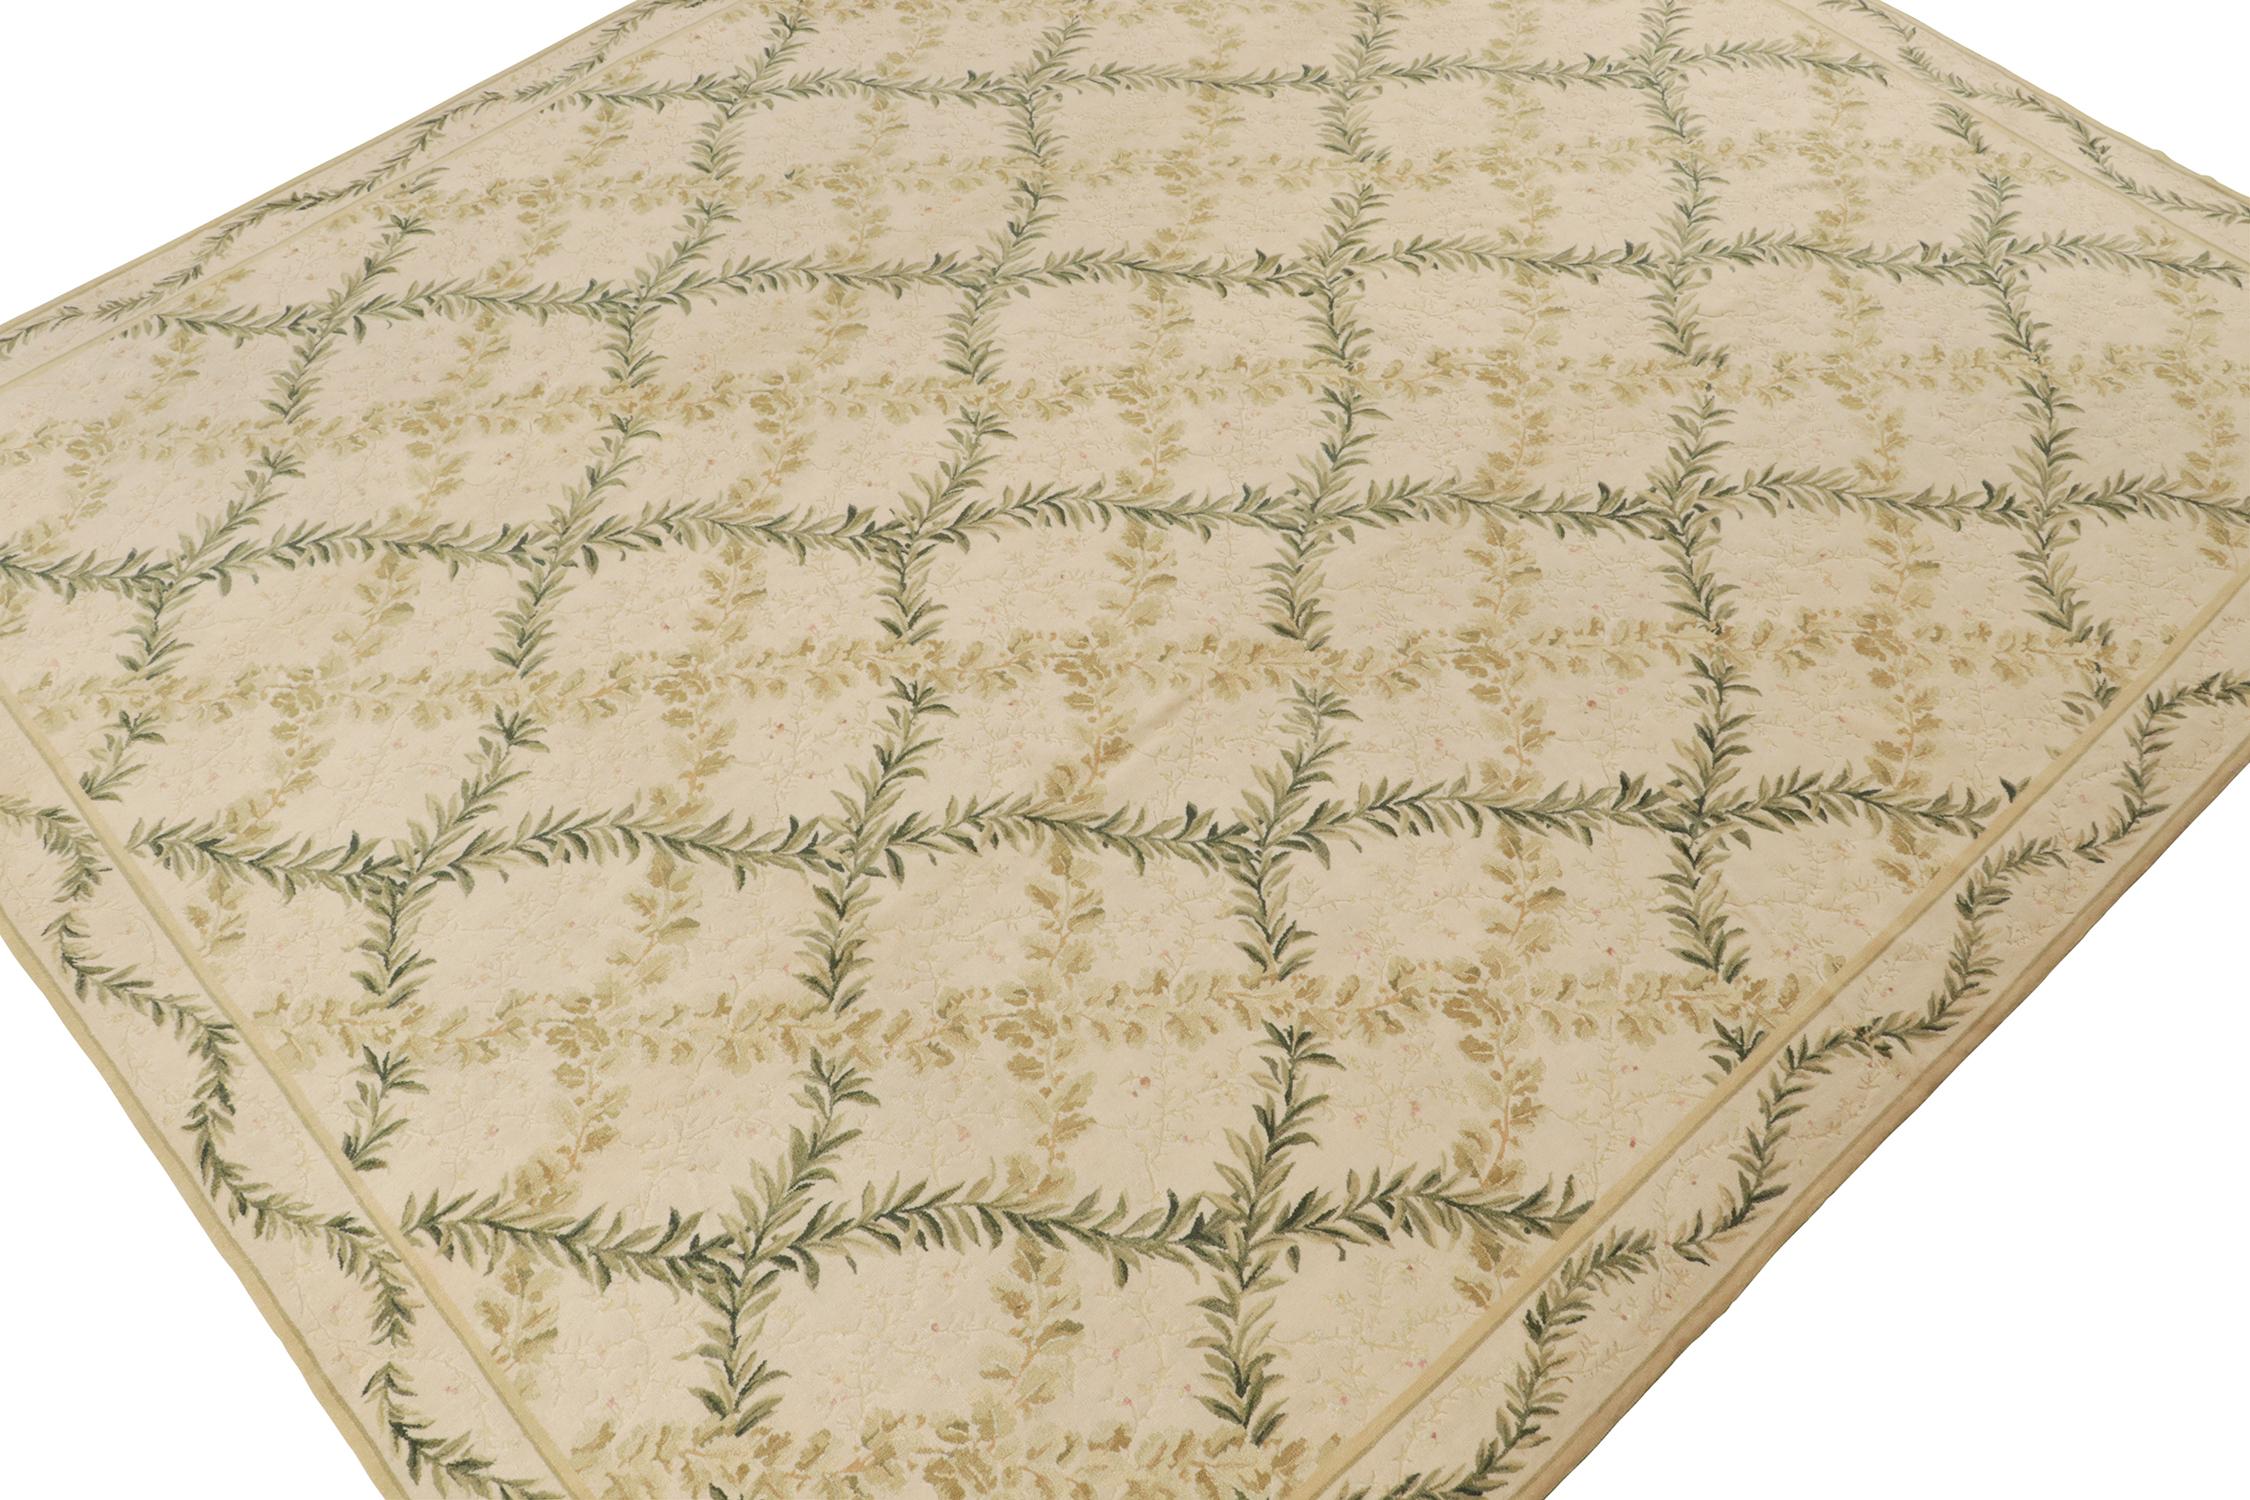 Chinese Rug & Kilim’s Tudor Style Flat Weave in Green and Cream Trellis Floral Patterns For Sale